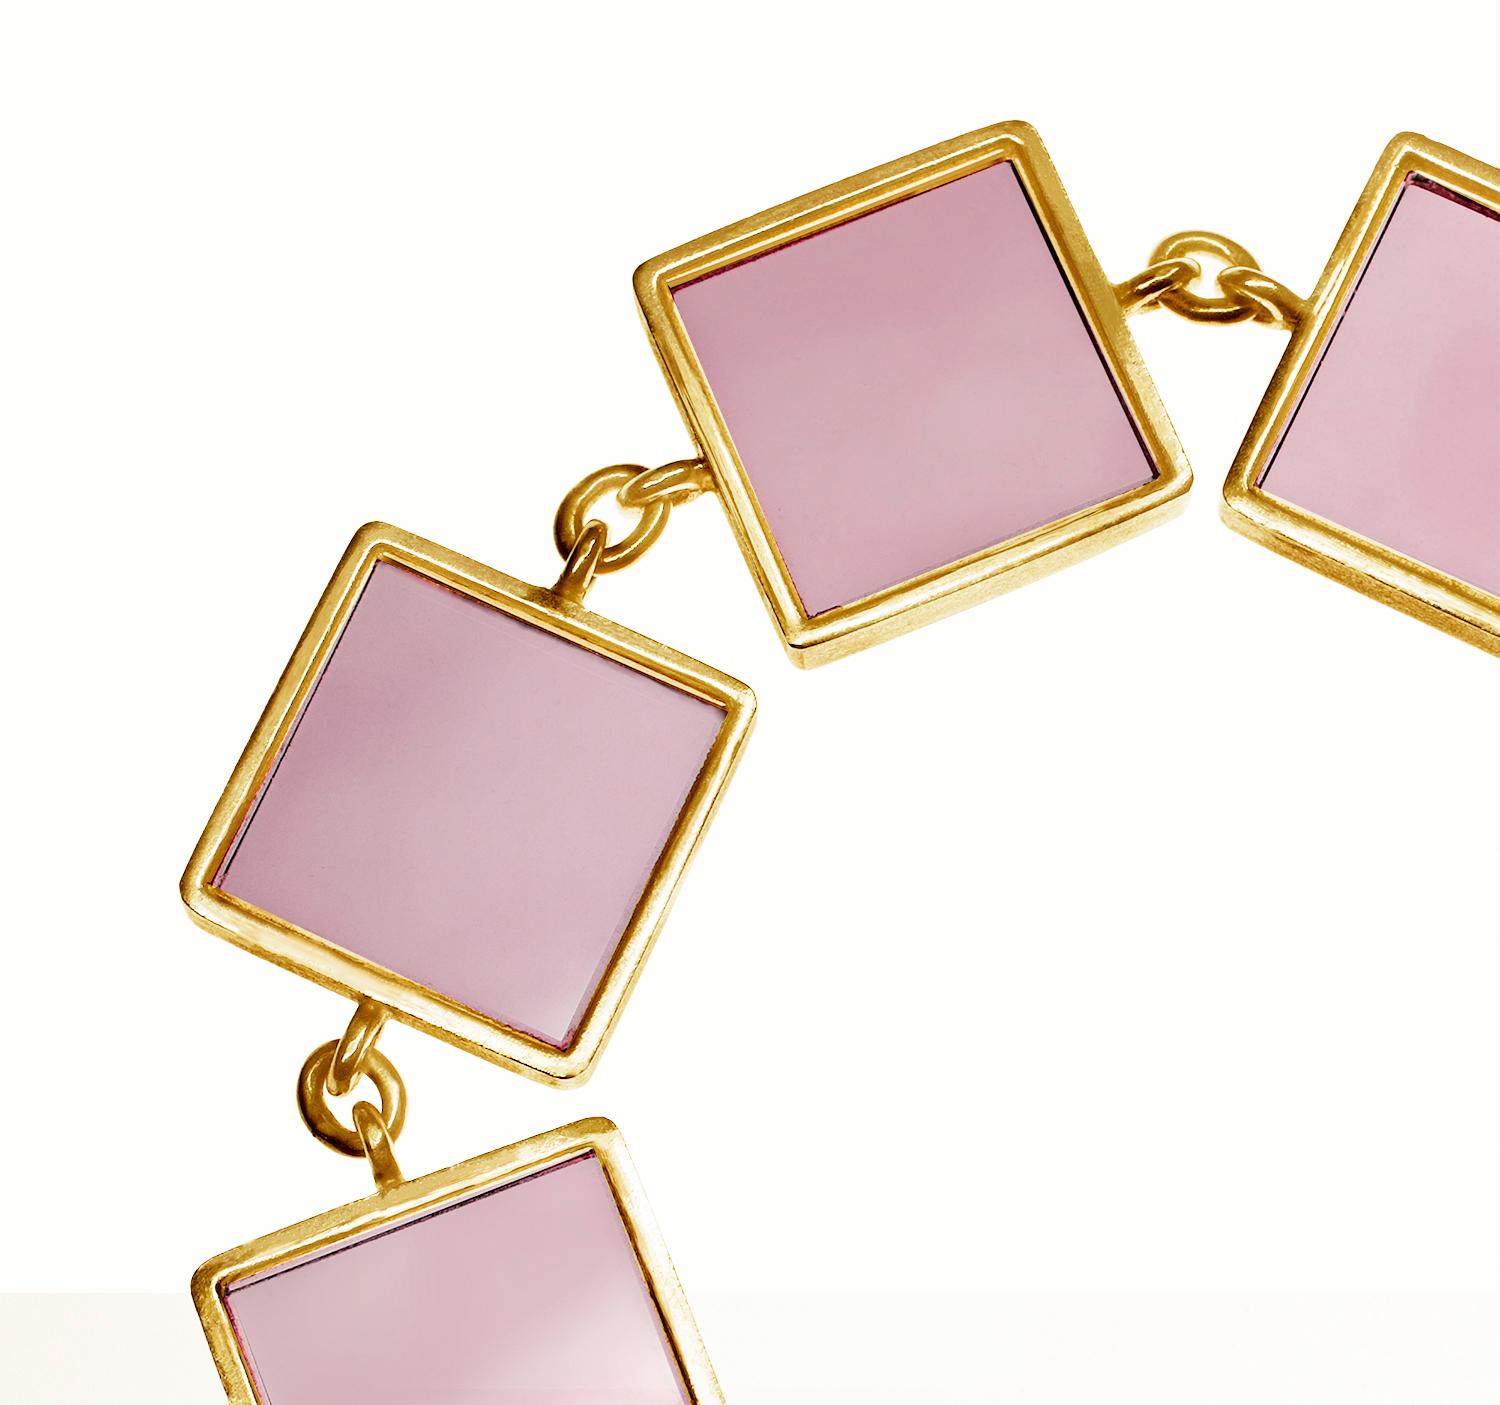 This designer jewellery bracelet is in 14 karat rose (or yellow) gold with seven 15x15x3 mm pink onyx. The Ink collection was featured in Harper's Bazaar UA and Vogue UA published issues.

The bracelet shines gently because of the gold and natural